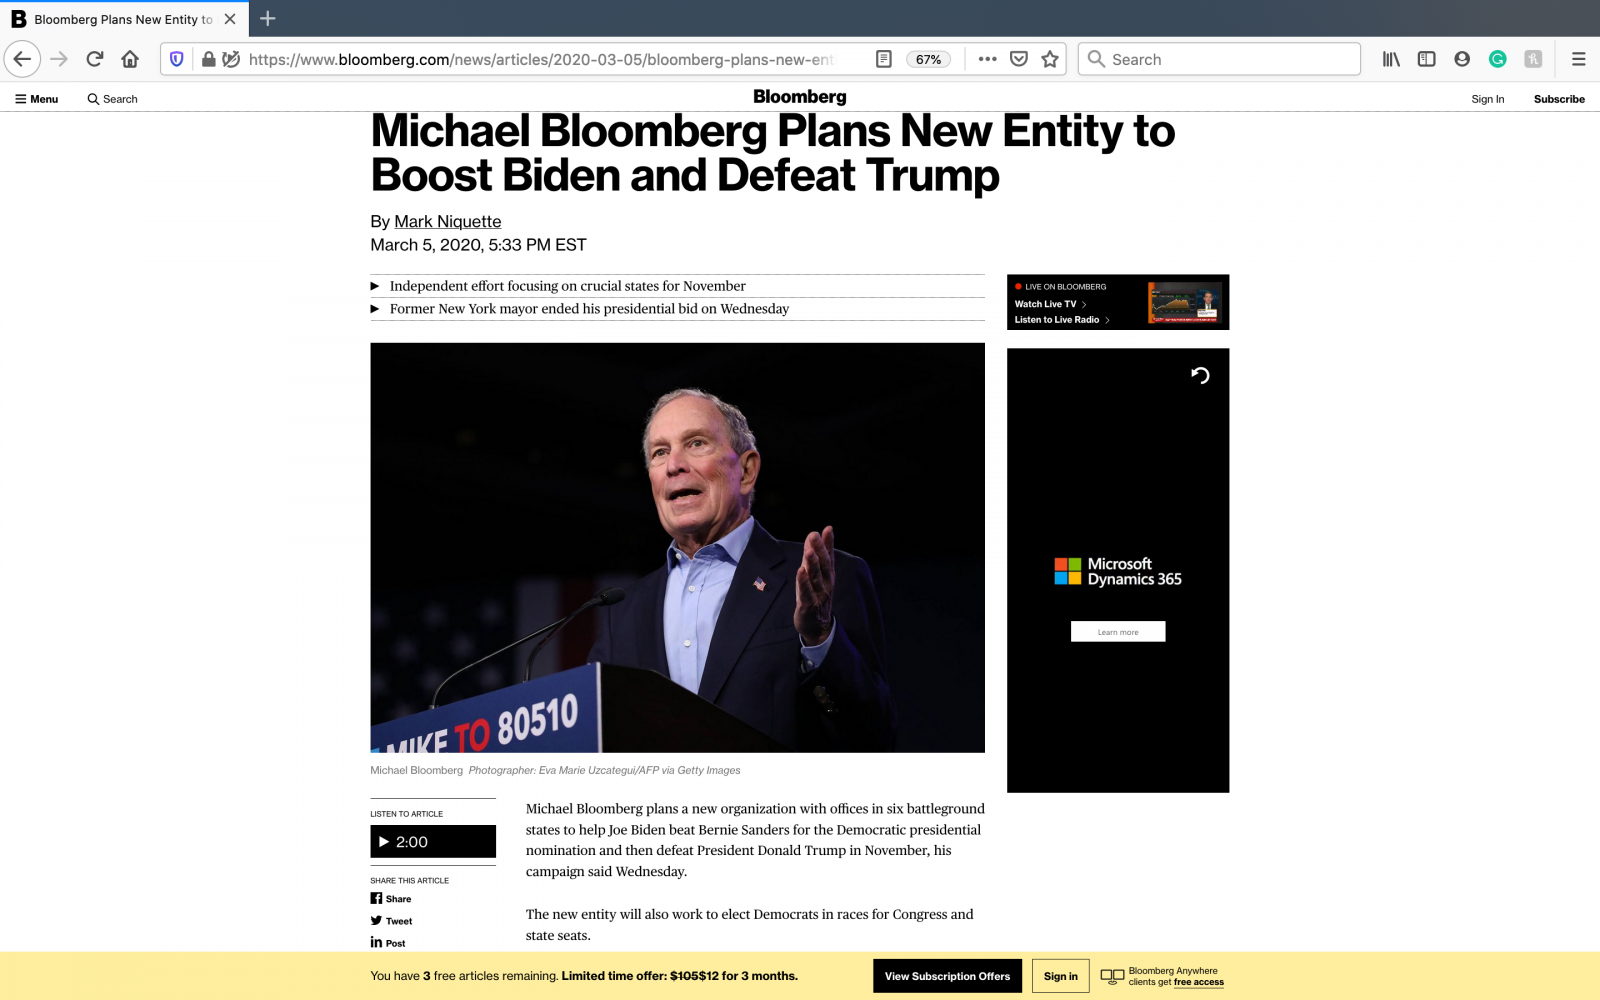 https://www.bloomberg.com/news/articles/2020-03-05/bloomberg-plans-new-entity-to-boost-biden-and-defeat-trump